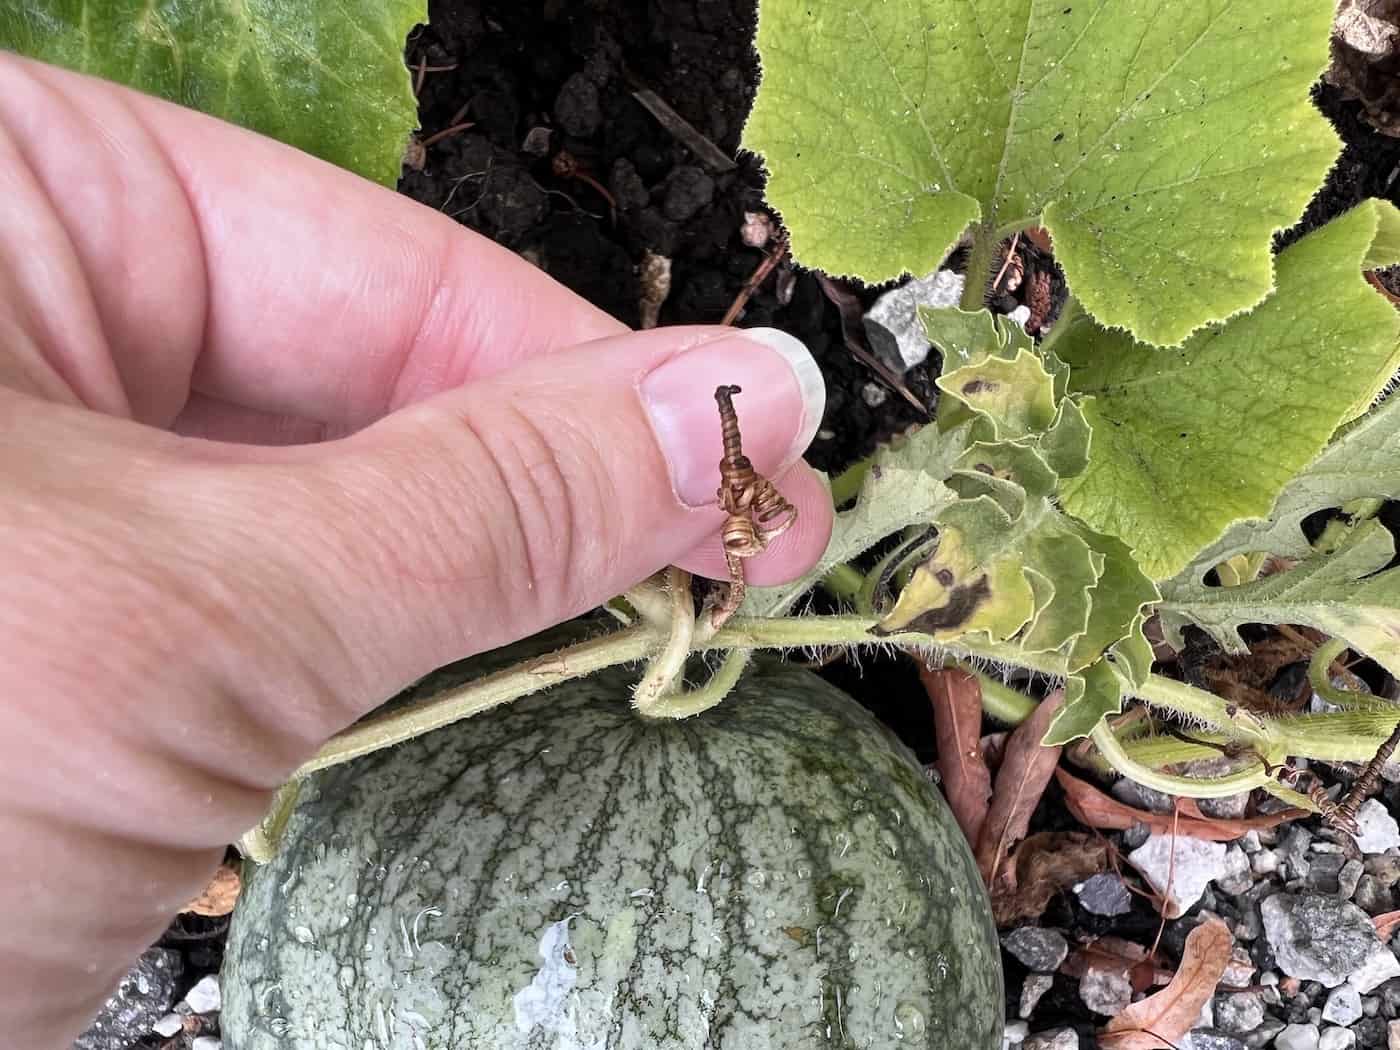 Looking for the dry tendril on a ripe watermelon before picking